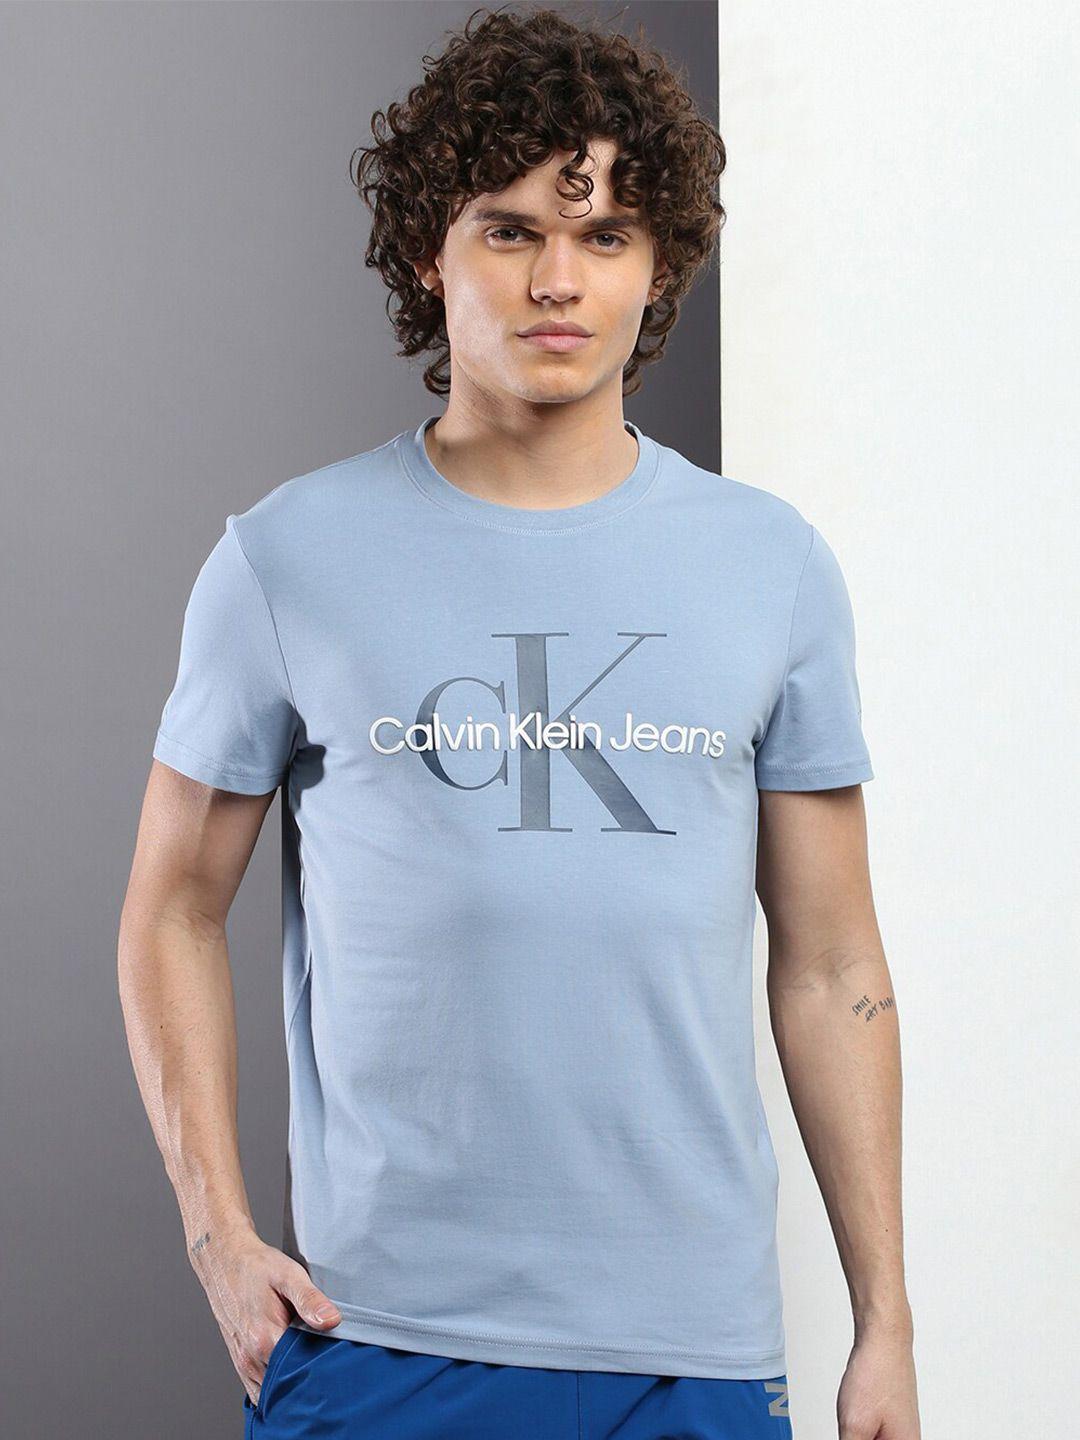 calvin-klein-jeans-typography-printed-slim-fit-t-shirt